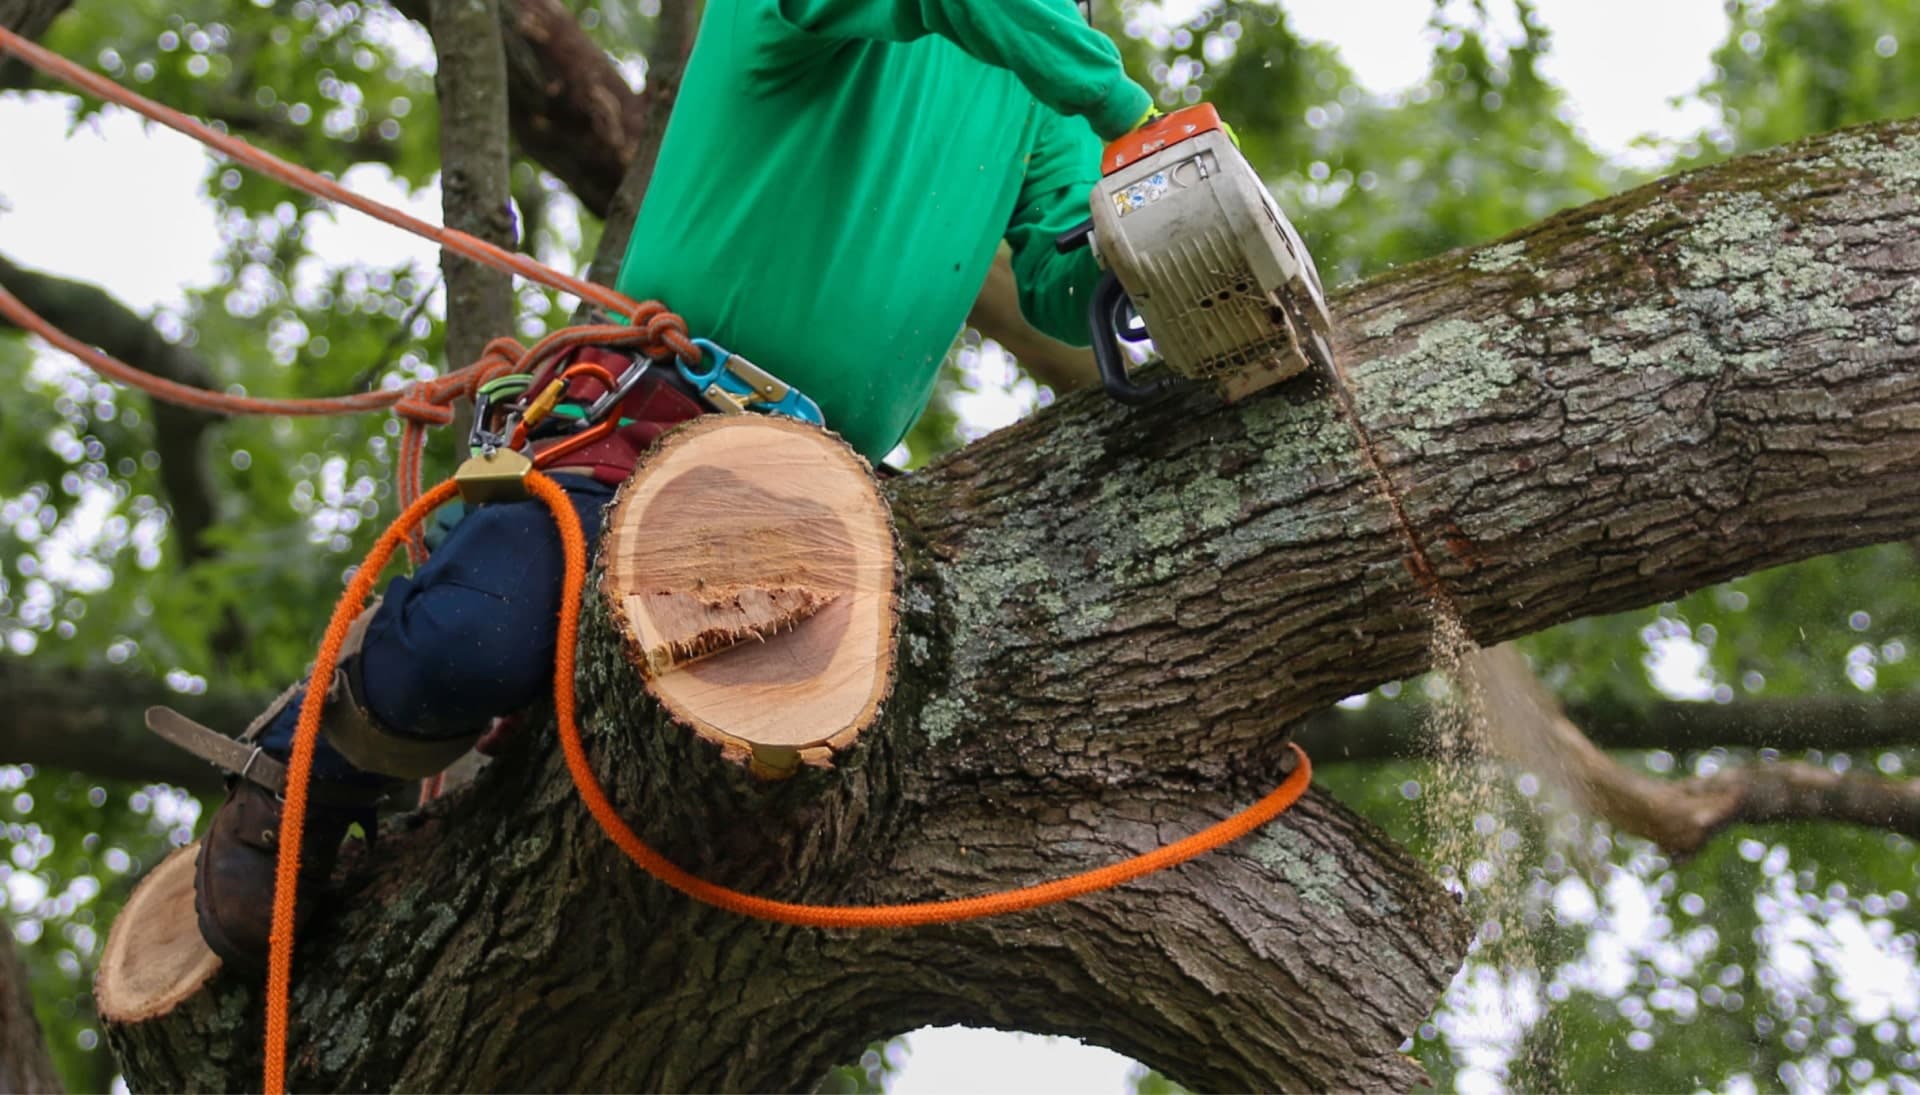 Shed your worries away with best tree removal in Long Island